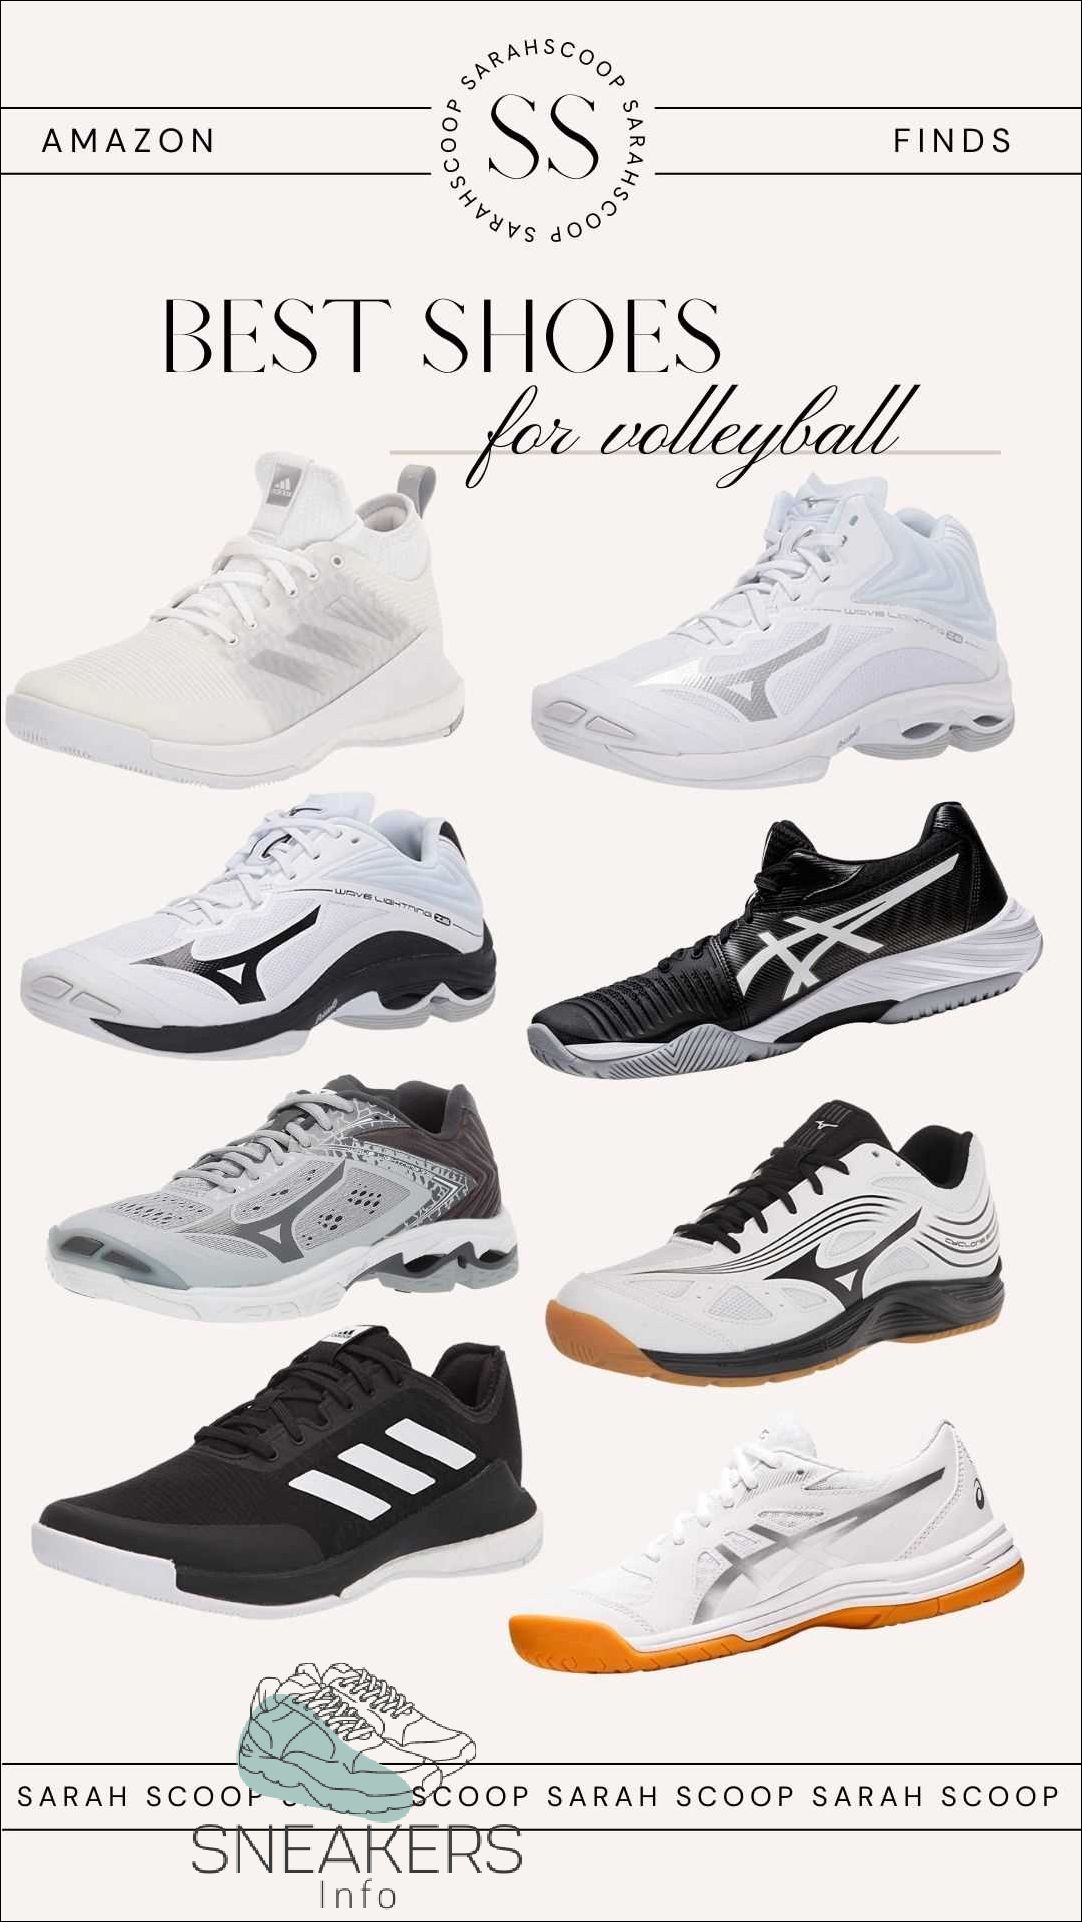 What are the best shoes for volleyball Tips and recommendations